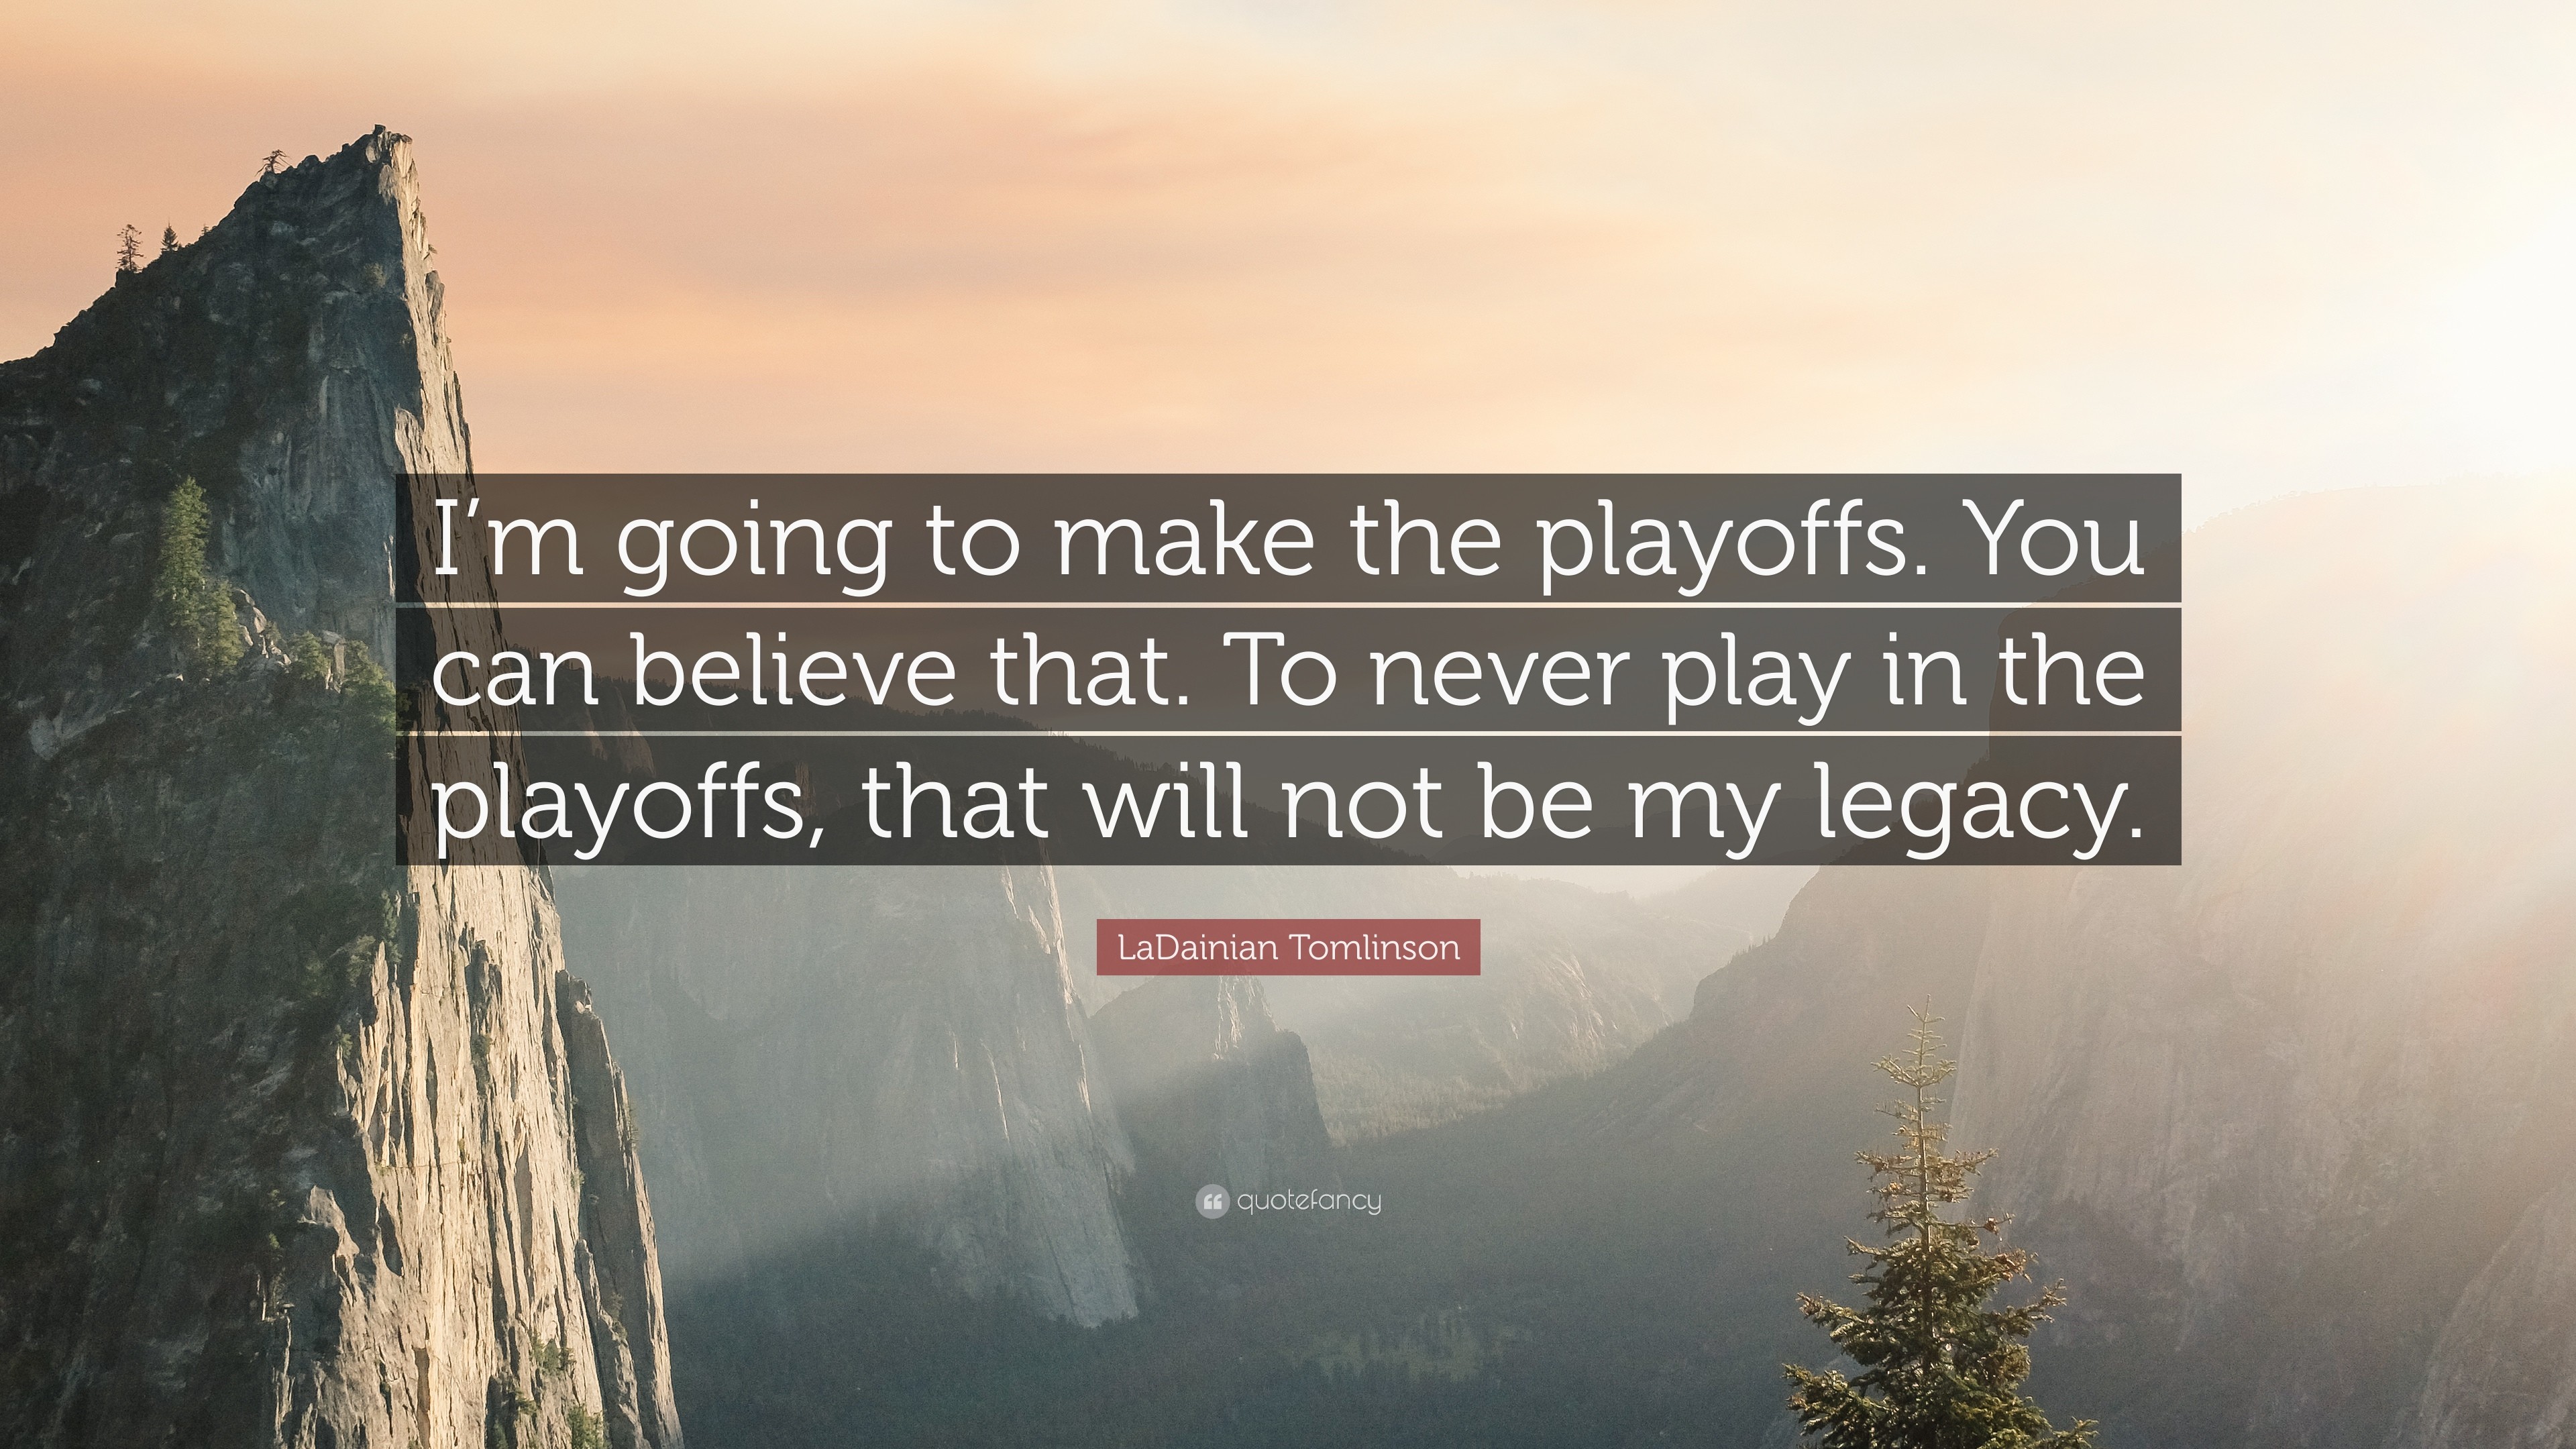 LaDainian Tomlinson Quote: “I'm going to make the playoffs. You can